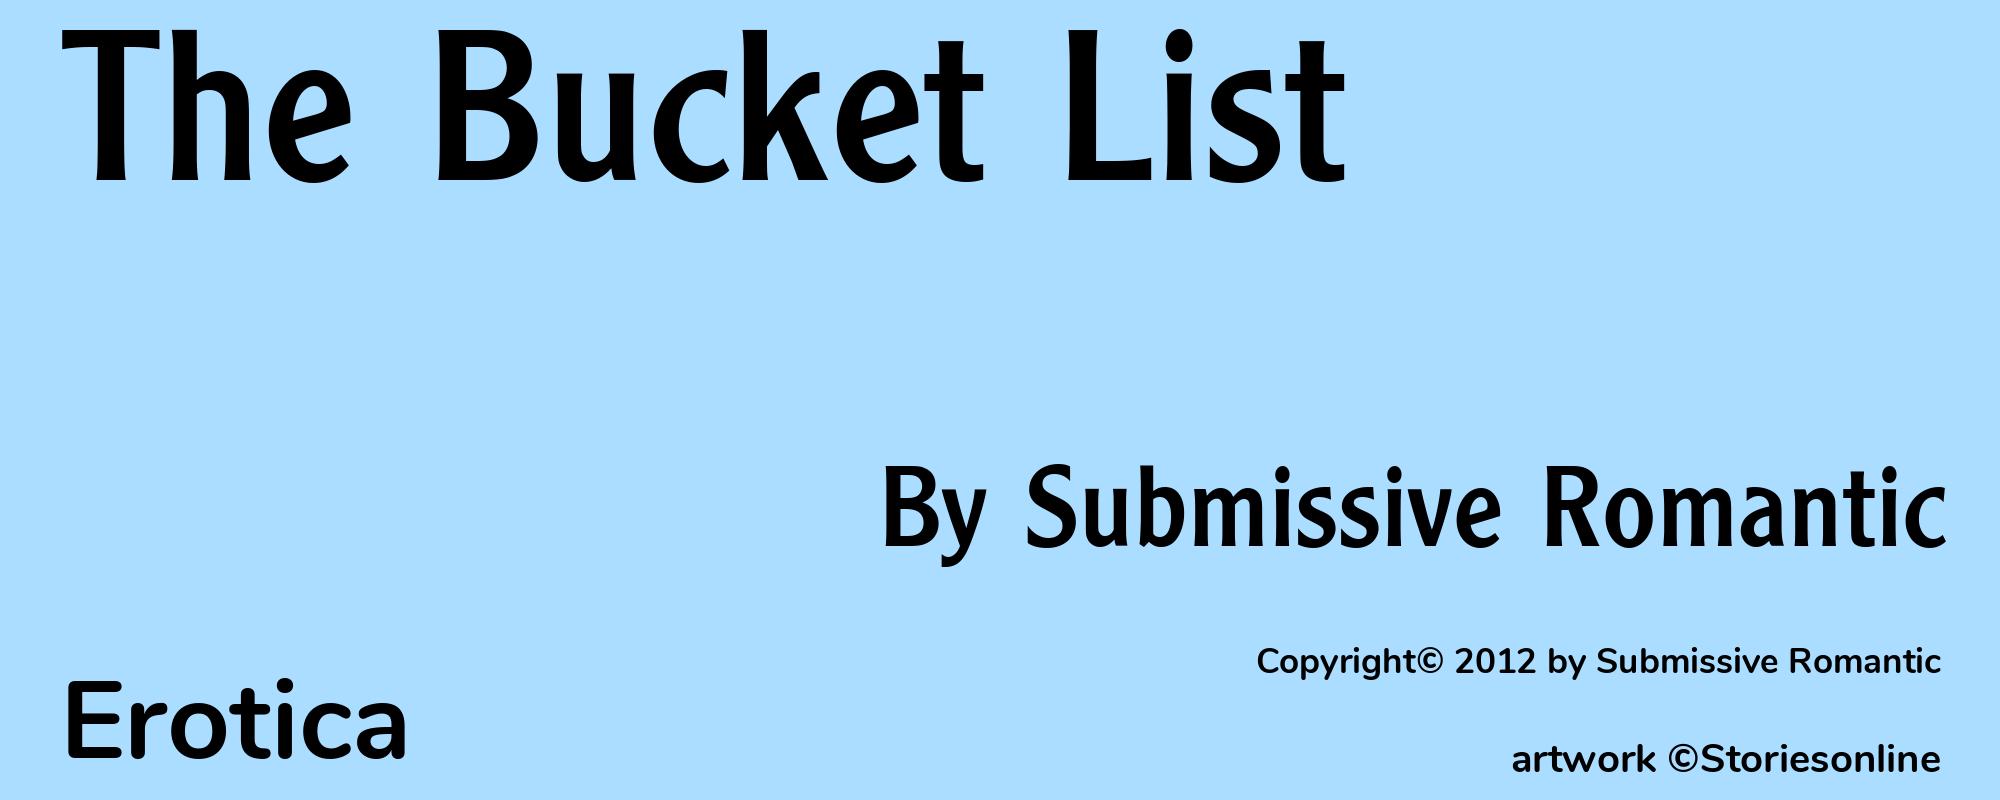 The Bucket List - Cover